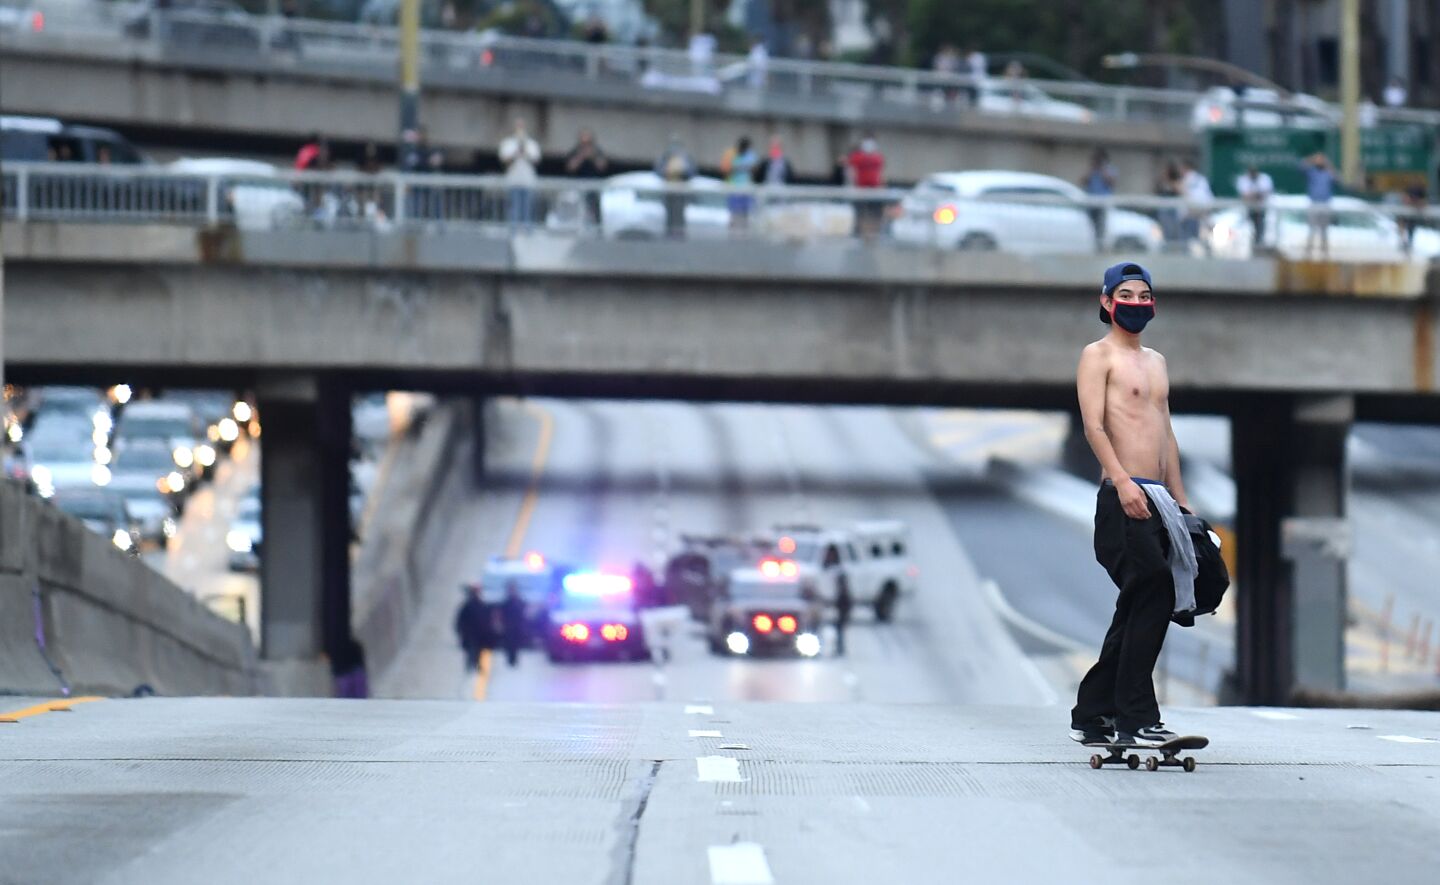 A protester rides a skateboard on the 110 Freeway.